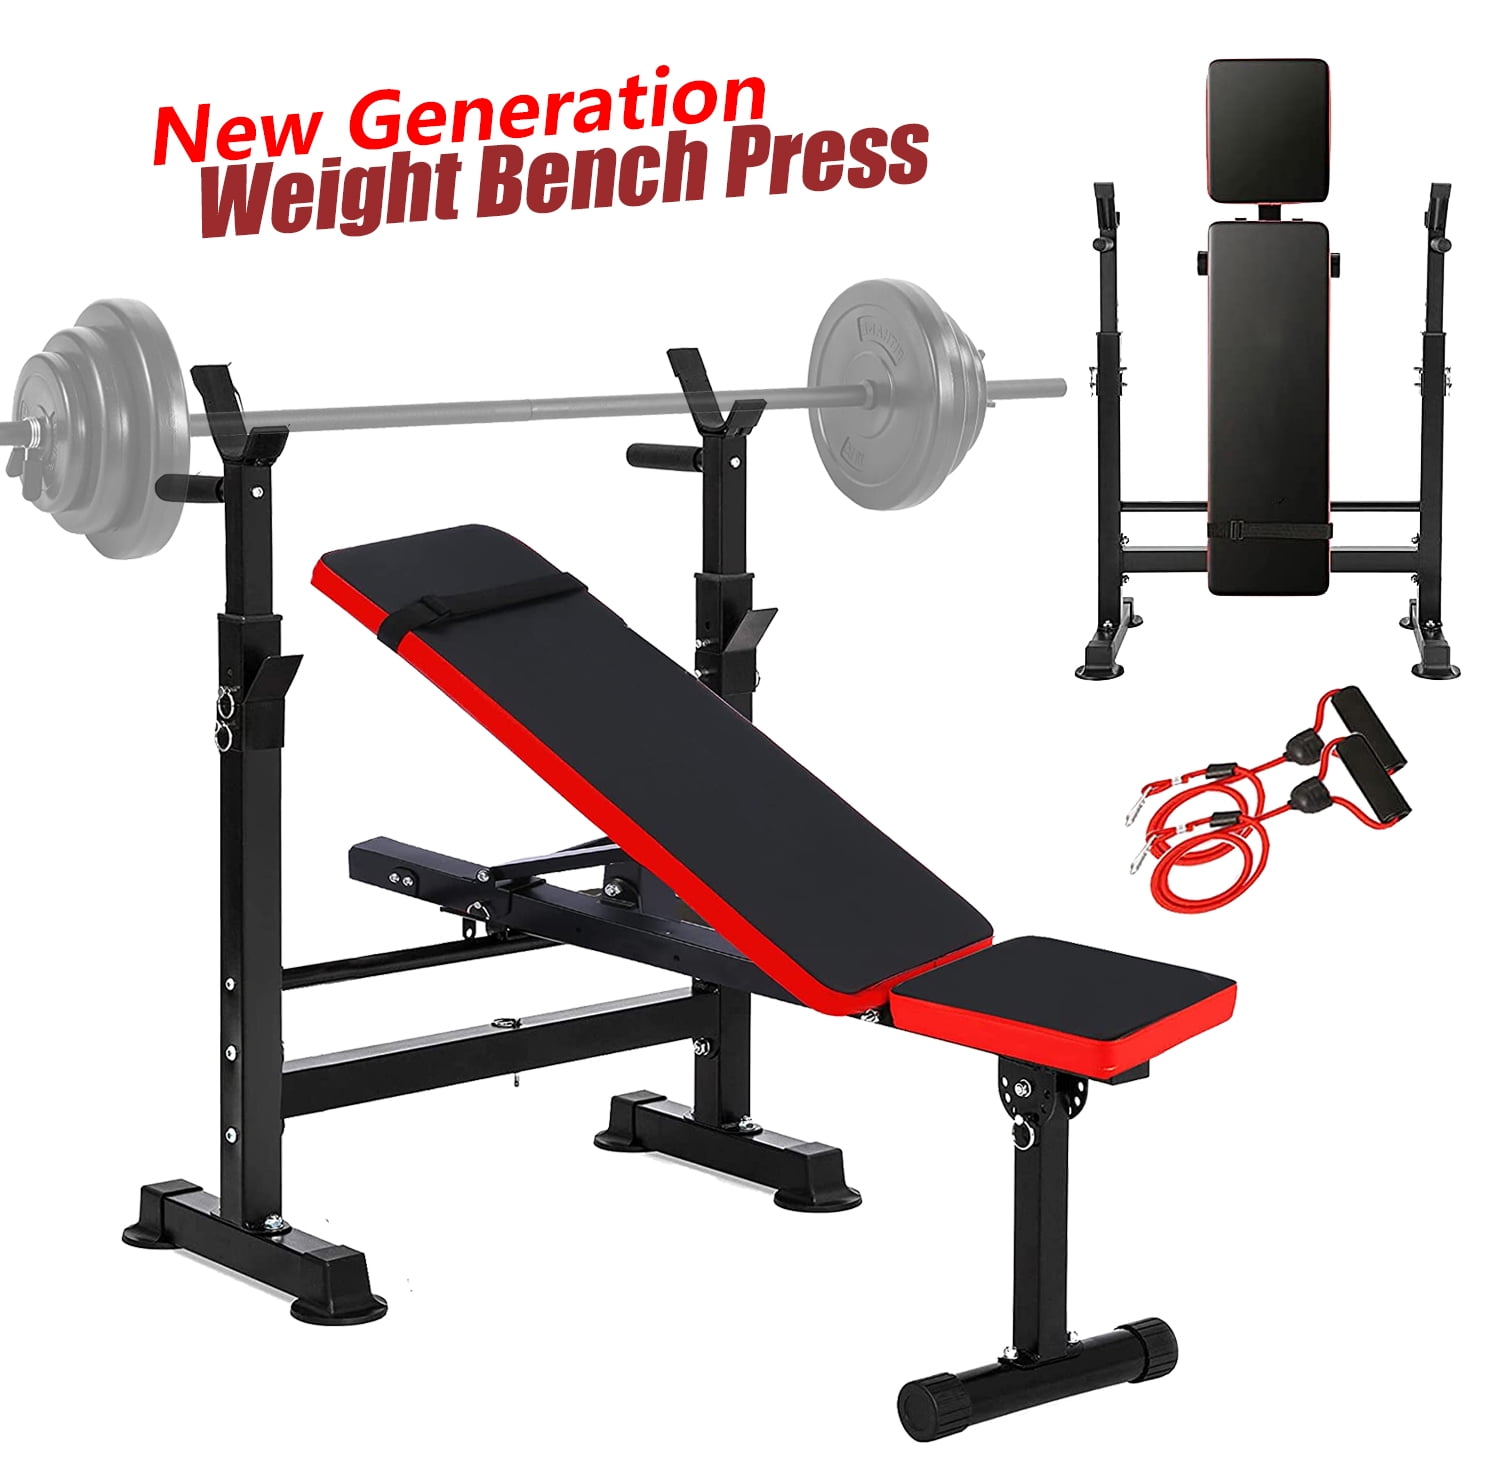 Weight Bench Exercise Equipment For Kids Child Safe Fun Fitness Strength Train 